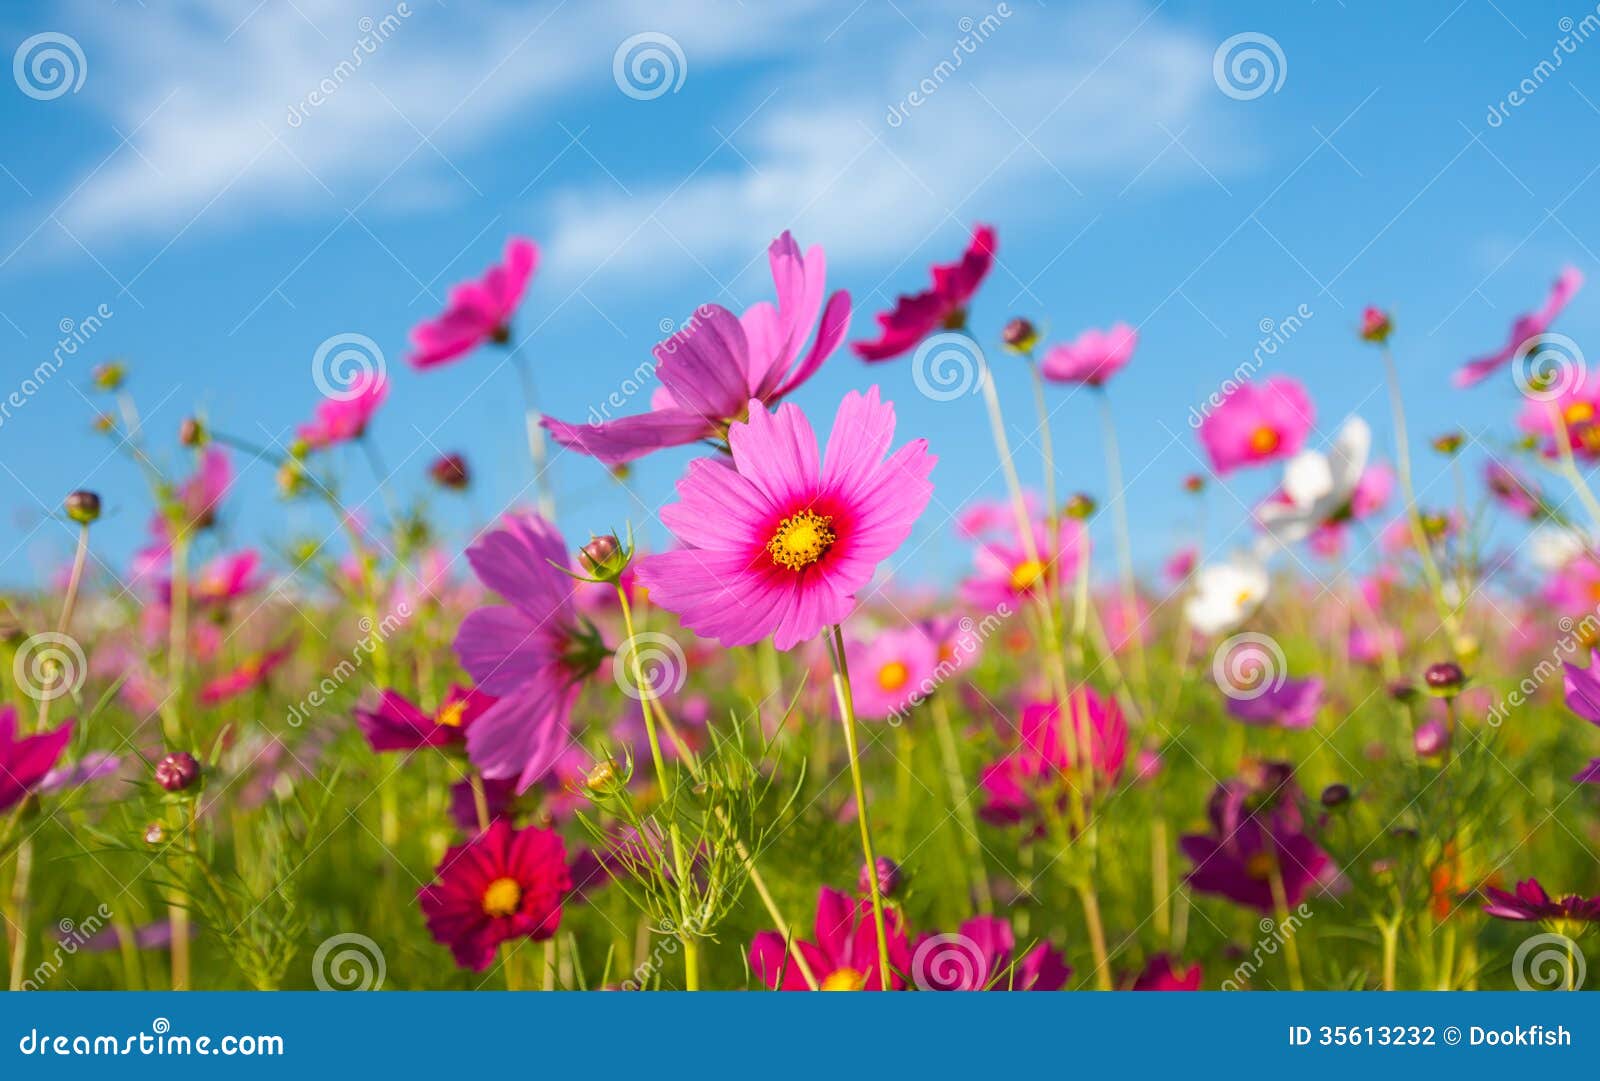 the cosmos flower field